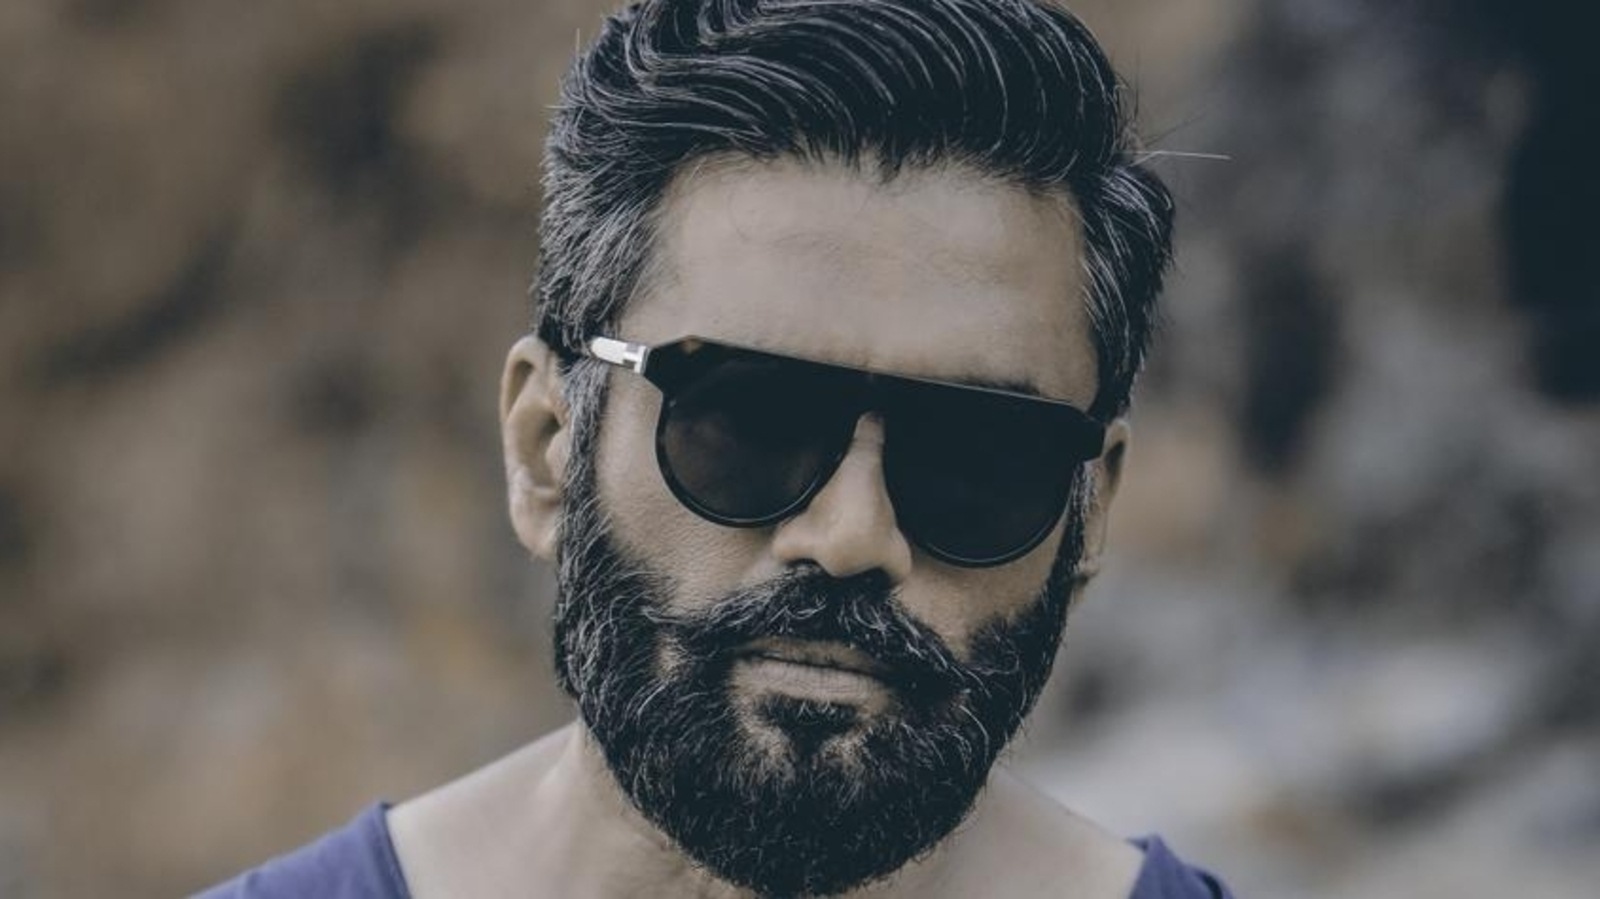 Suniel Shetty says ‘Bollywood is not filled with druggies’: ‘Look at them like children and forgive such mistakes’